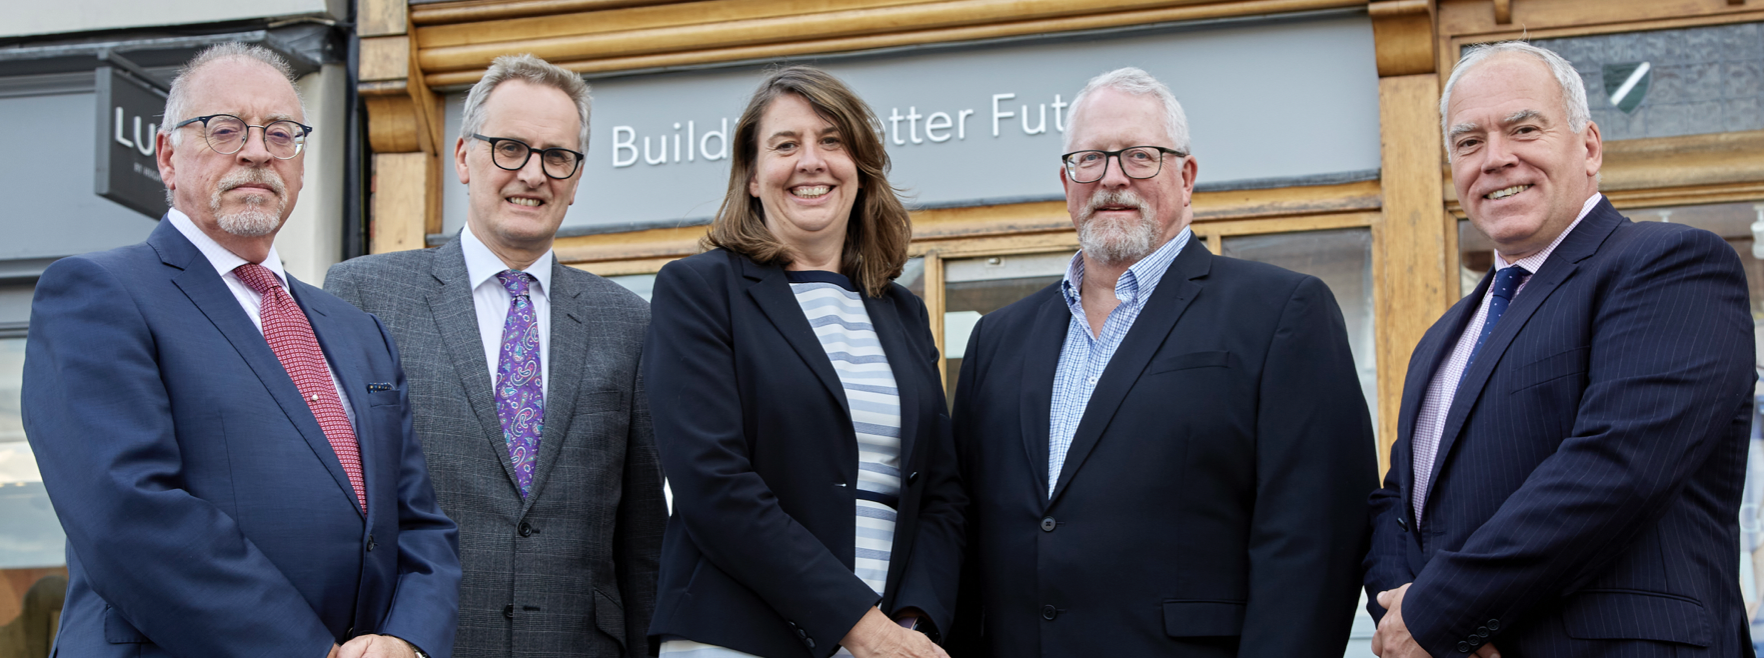 Beverley Building Society strengthens its Board